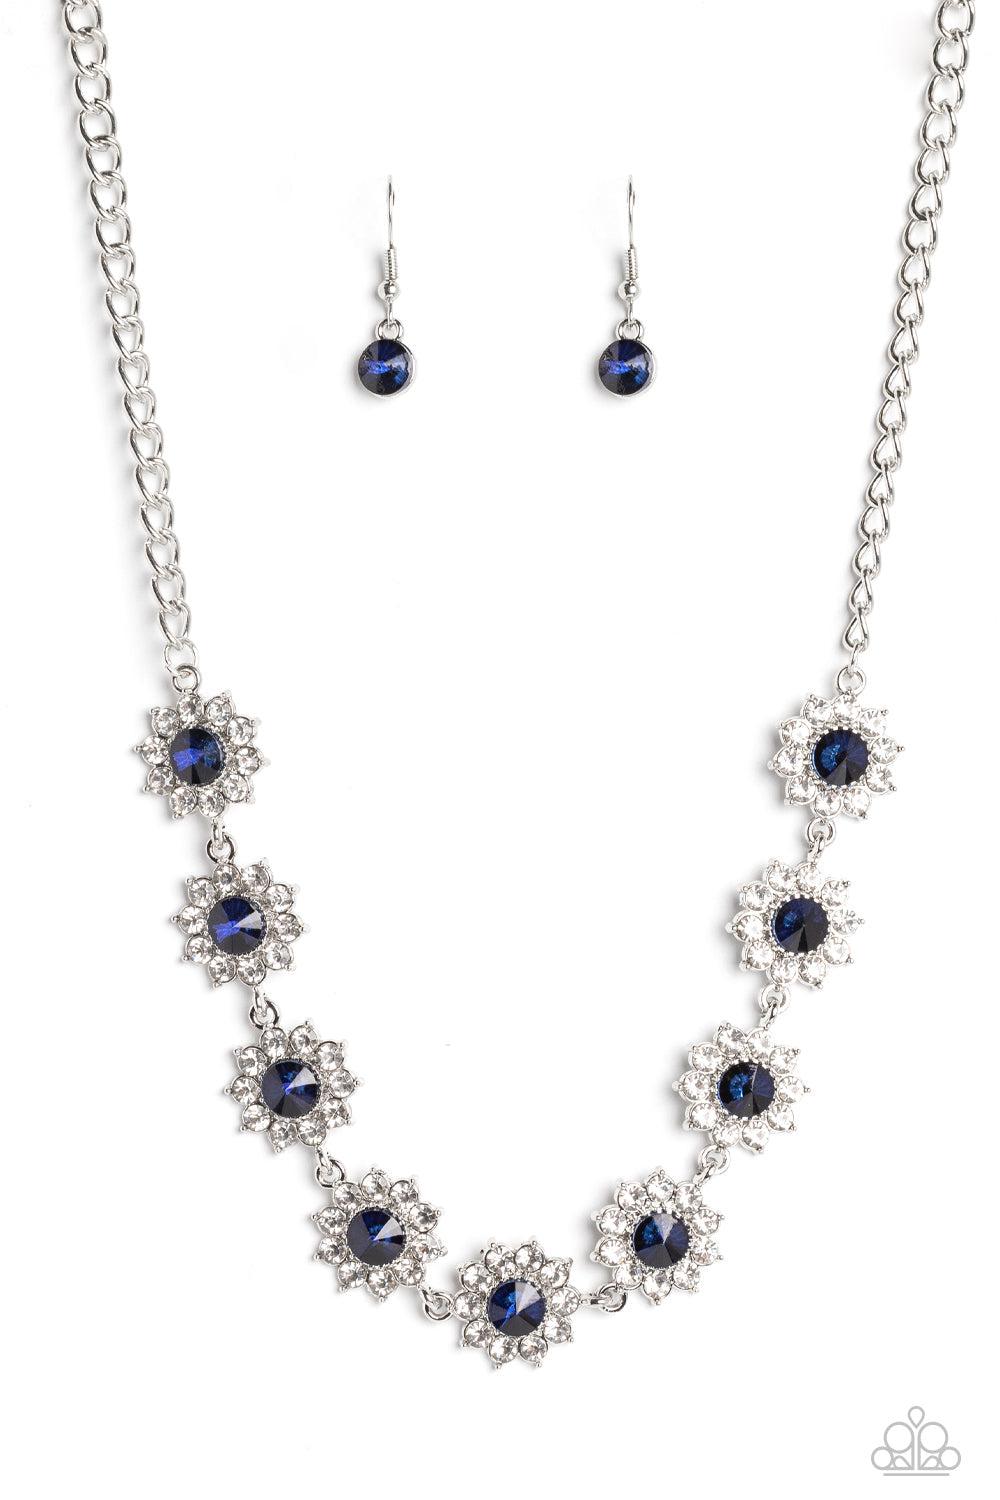 Blooming Brilliance Blue Rhinestone Necklace - Paparazzi Accessories- lightbox - CarasShop.com - $5 Jewelry by Cara Jewels